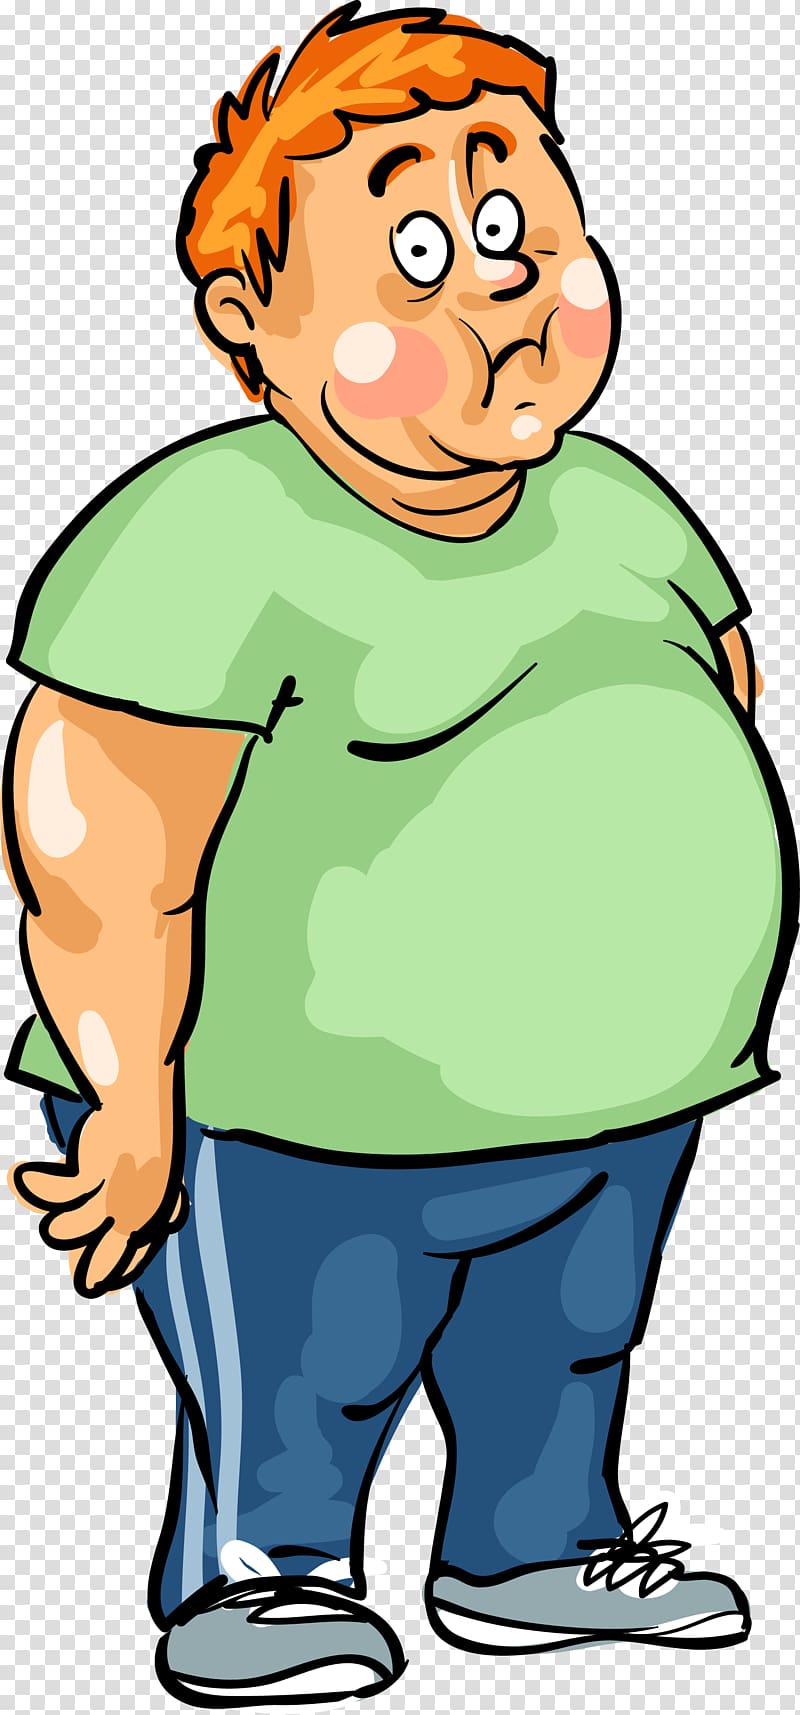 Fat clipart fat man, Fat fat man Transparent FREE for download on